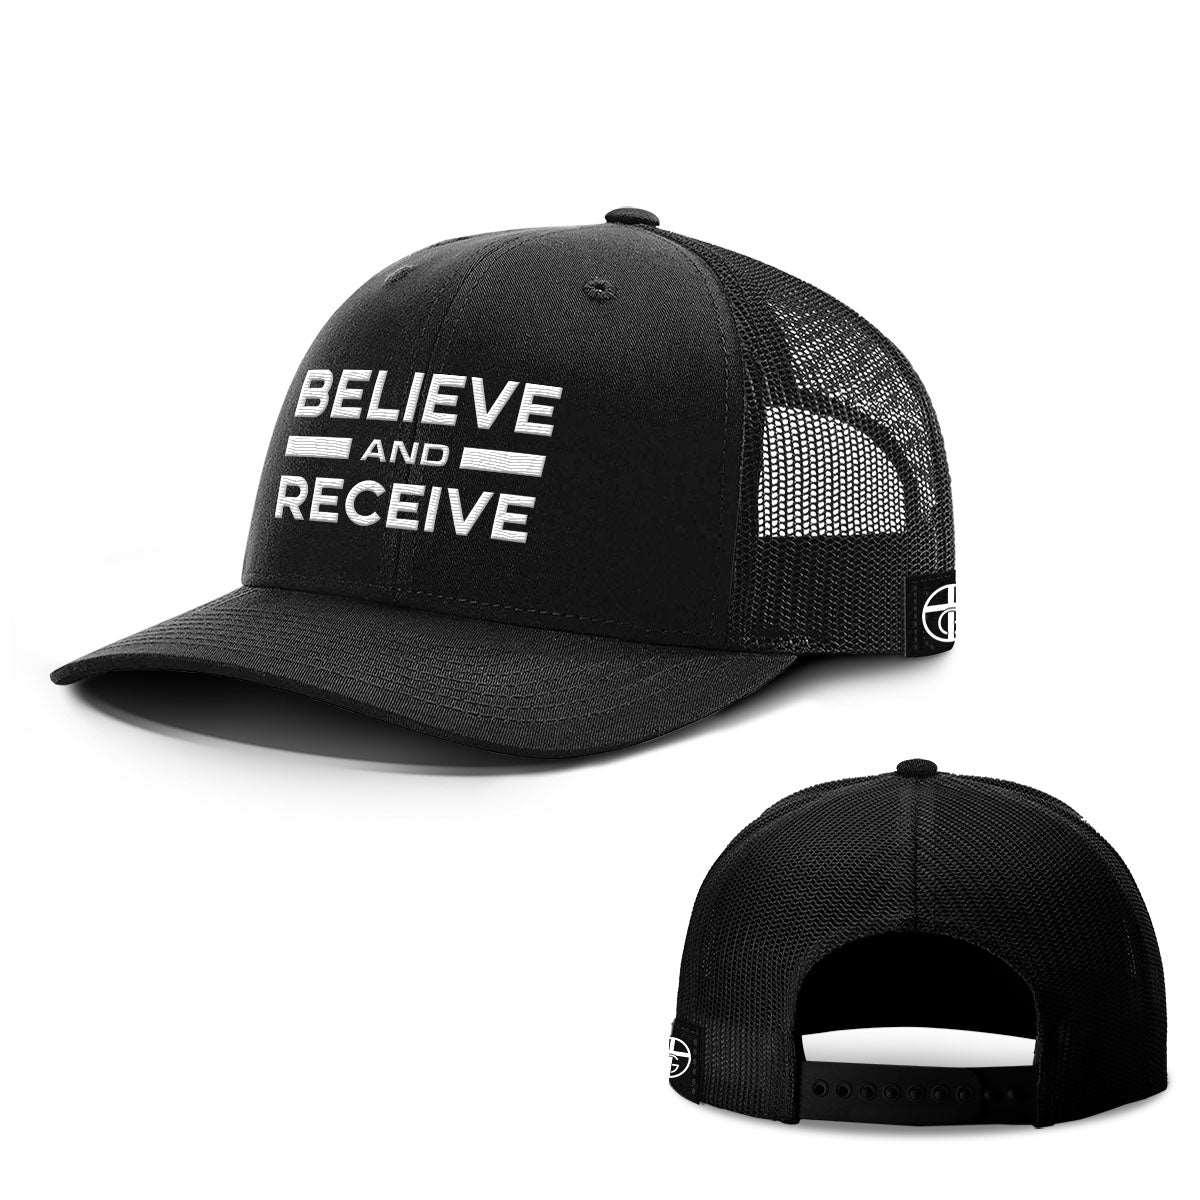 Believe And Receive Hats